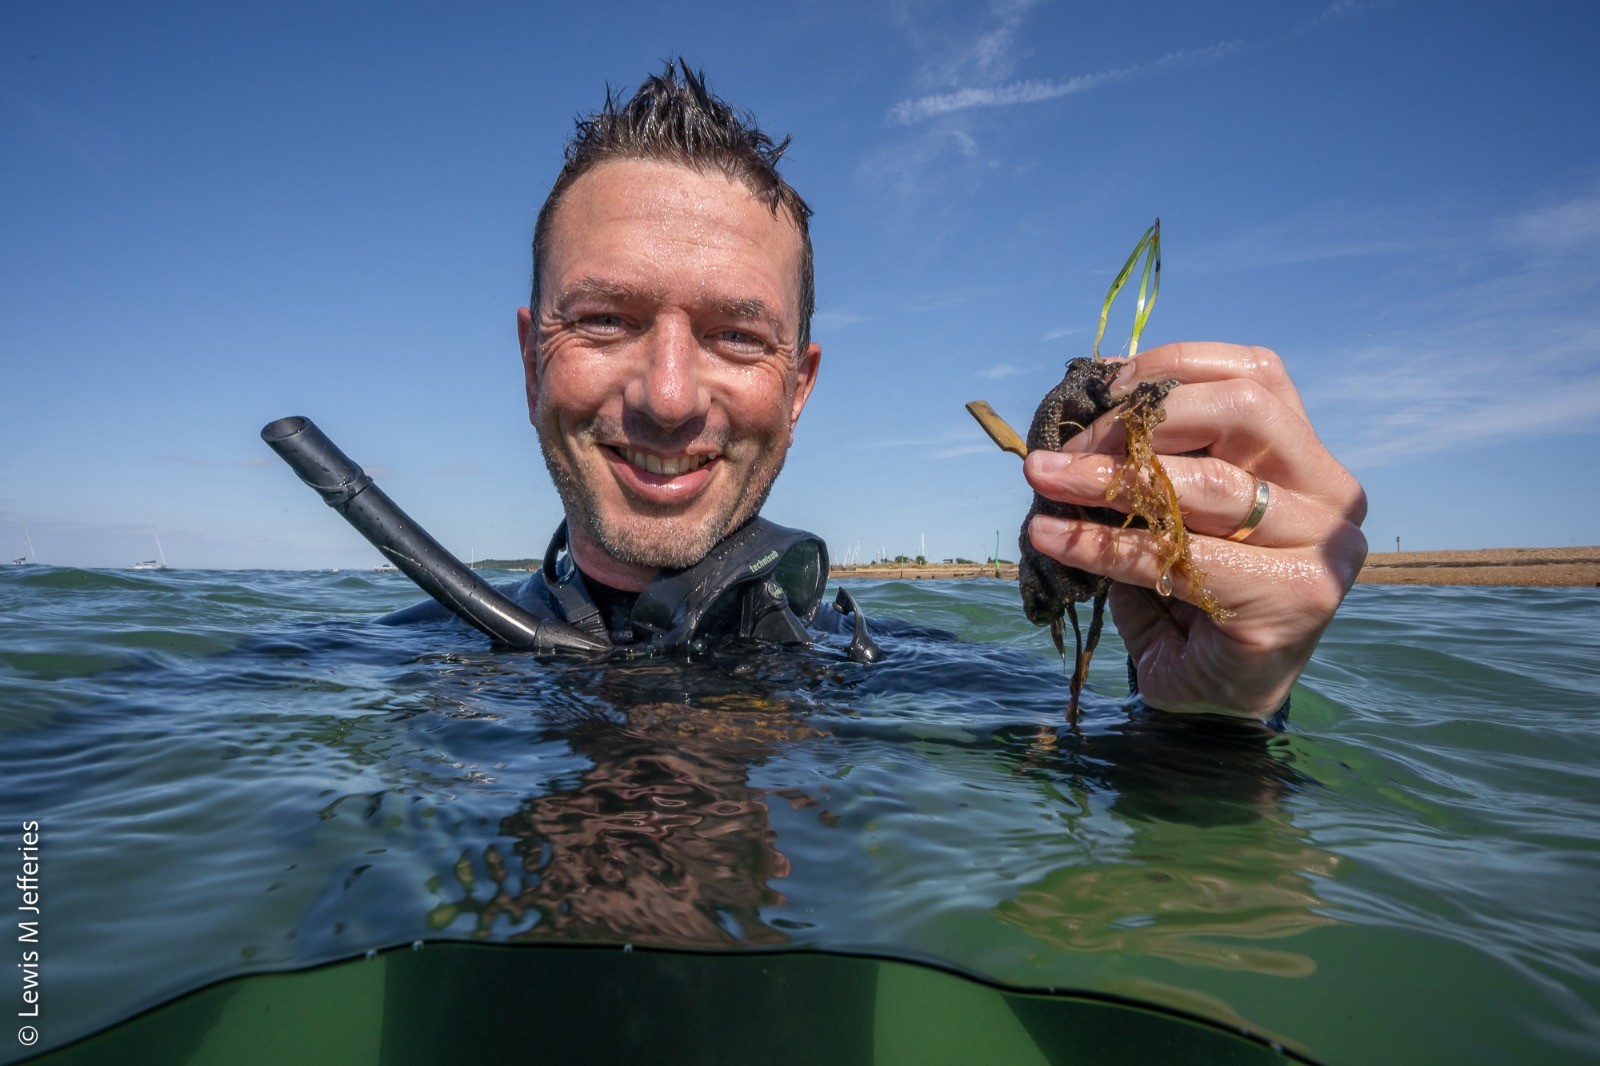 The planetary role of seagrass conservation